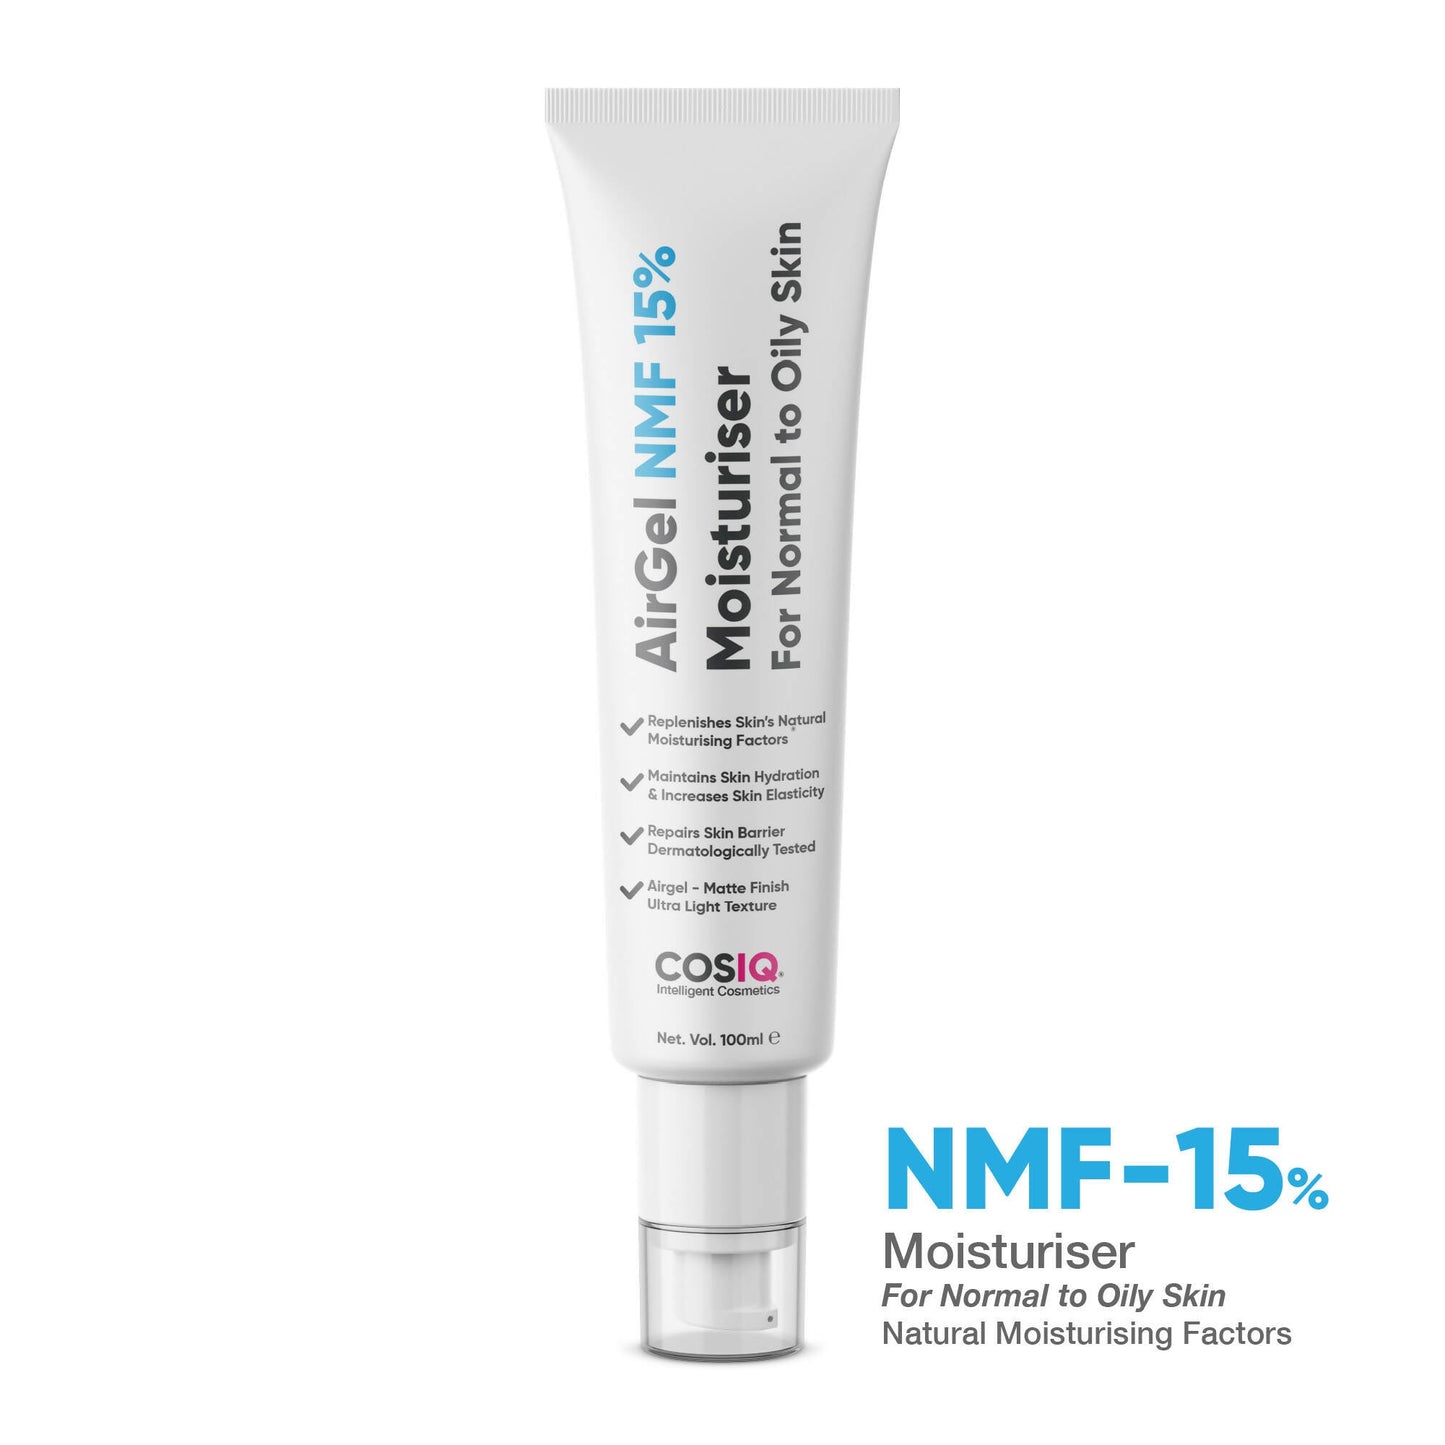 Cos-IQ AirGel NMF 15% for Oily Skin Moisturizer